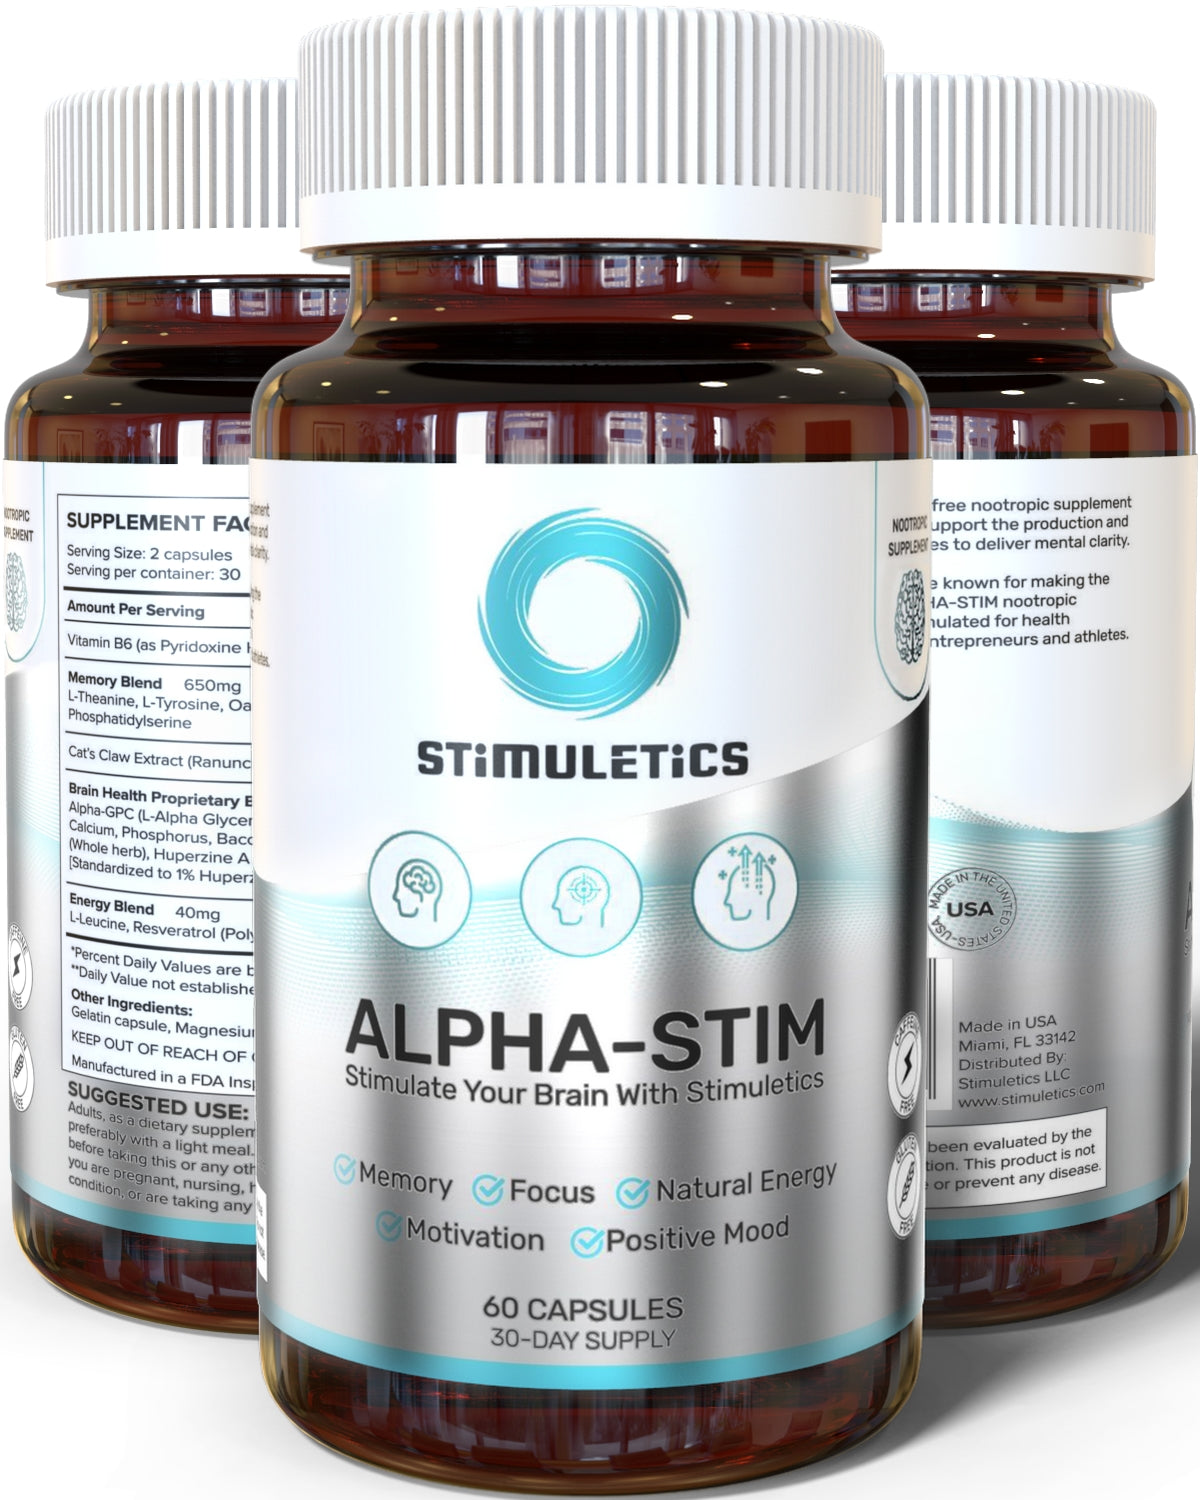 ALPHA-STIM Nootropic Brain Booster Supplement, 60 Capsules (30-Day Supply)